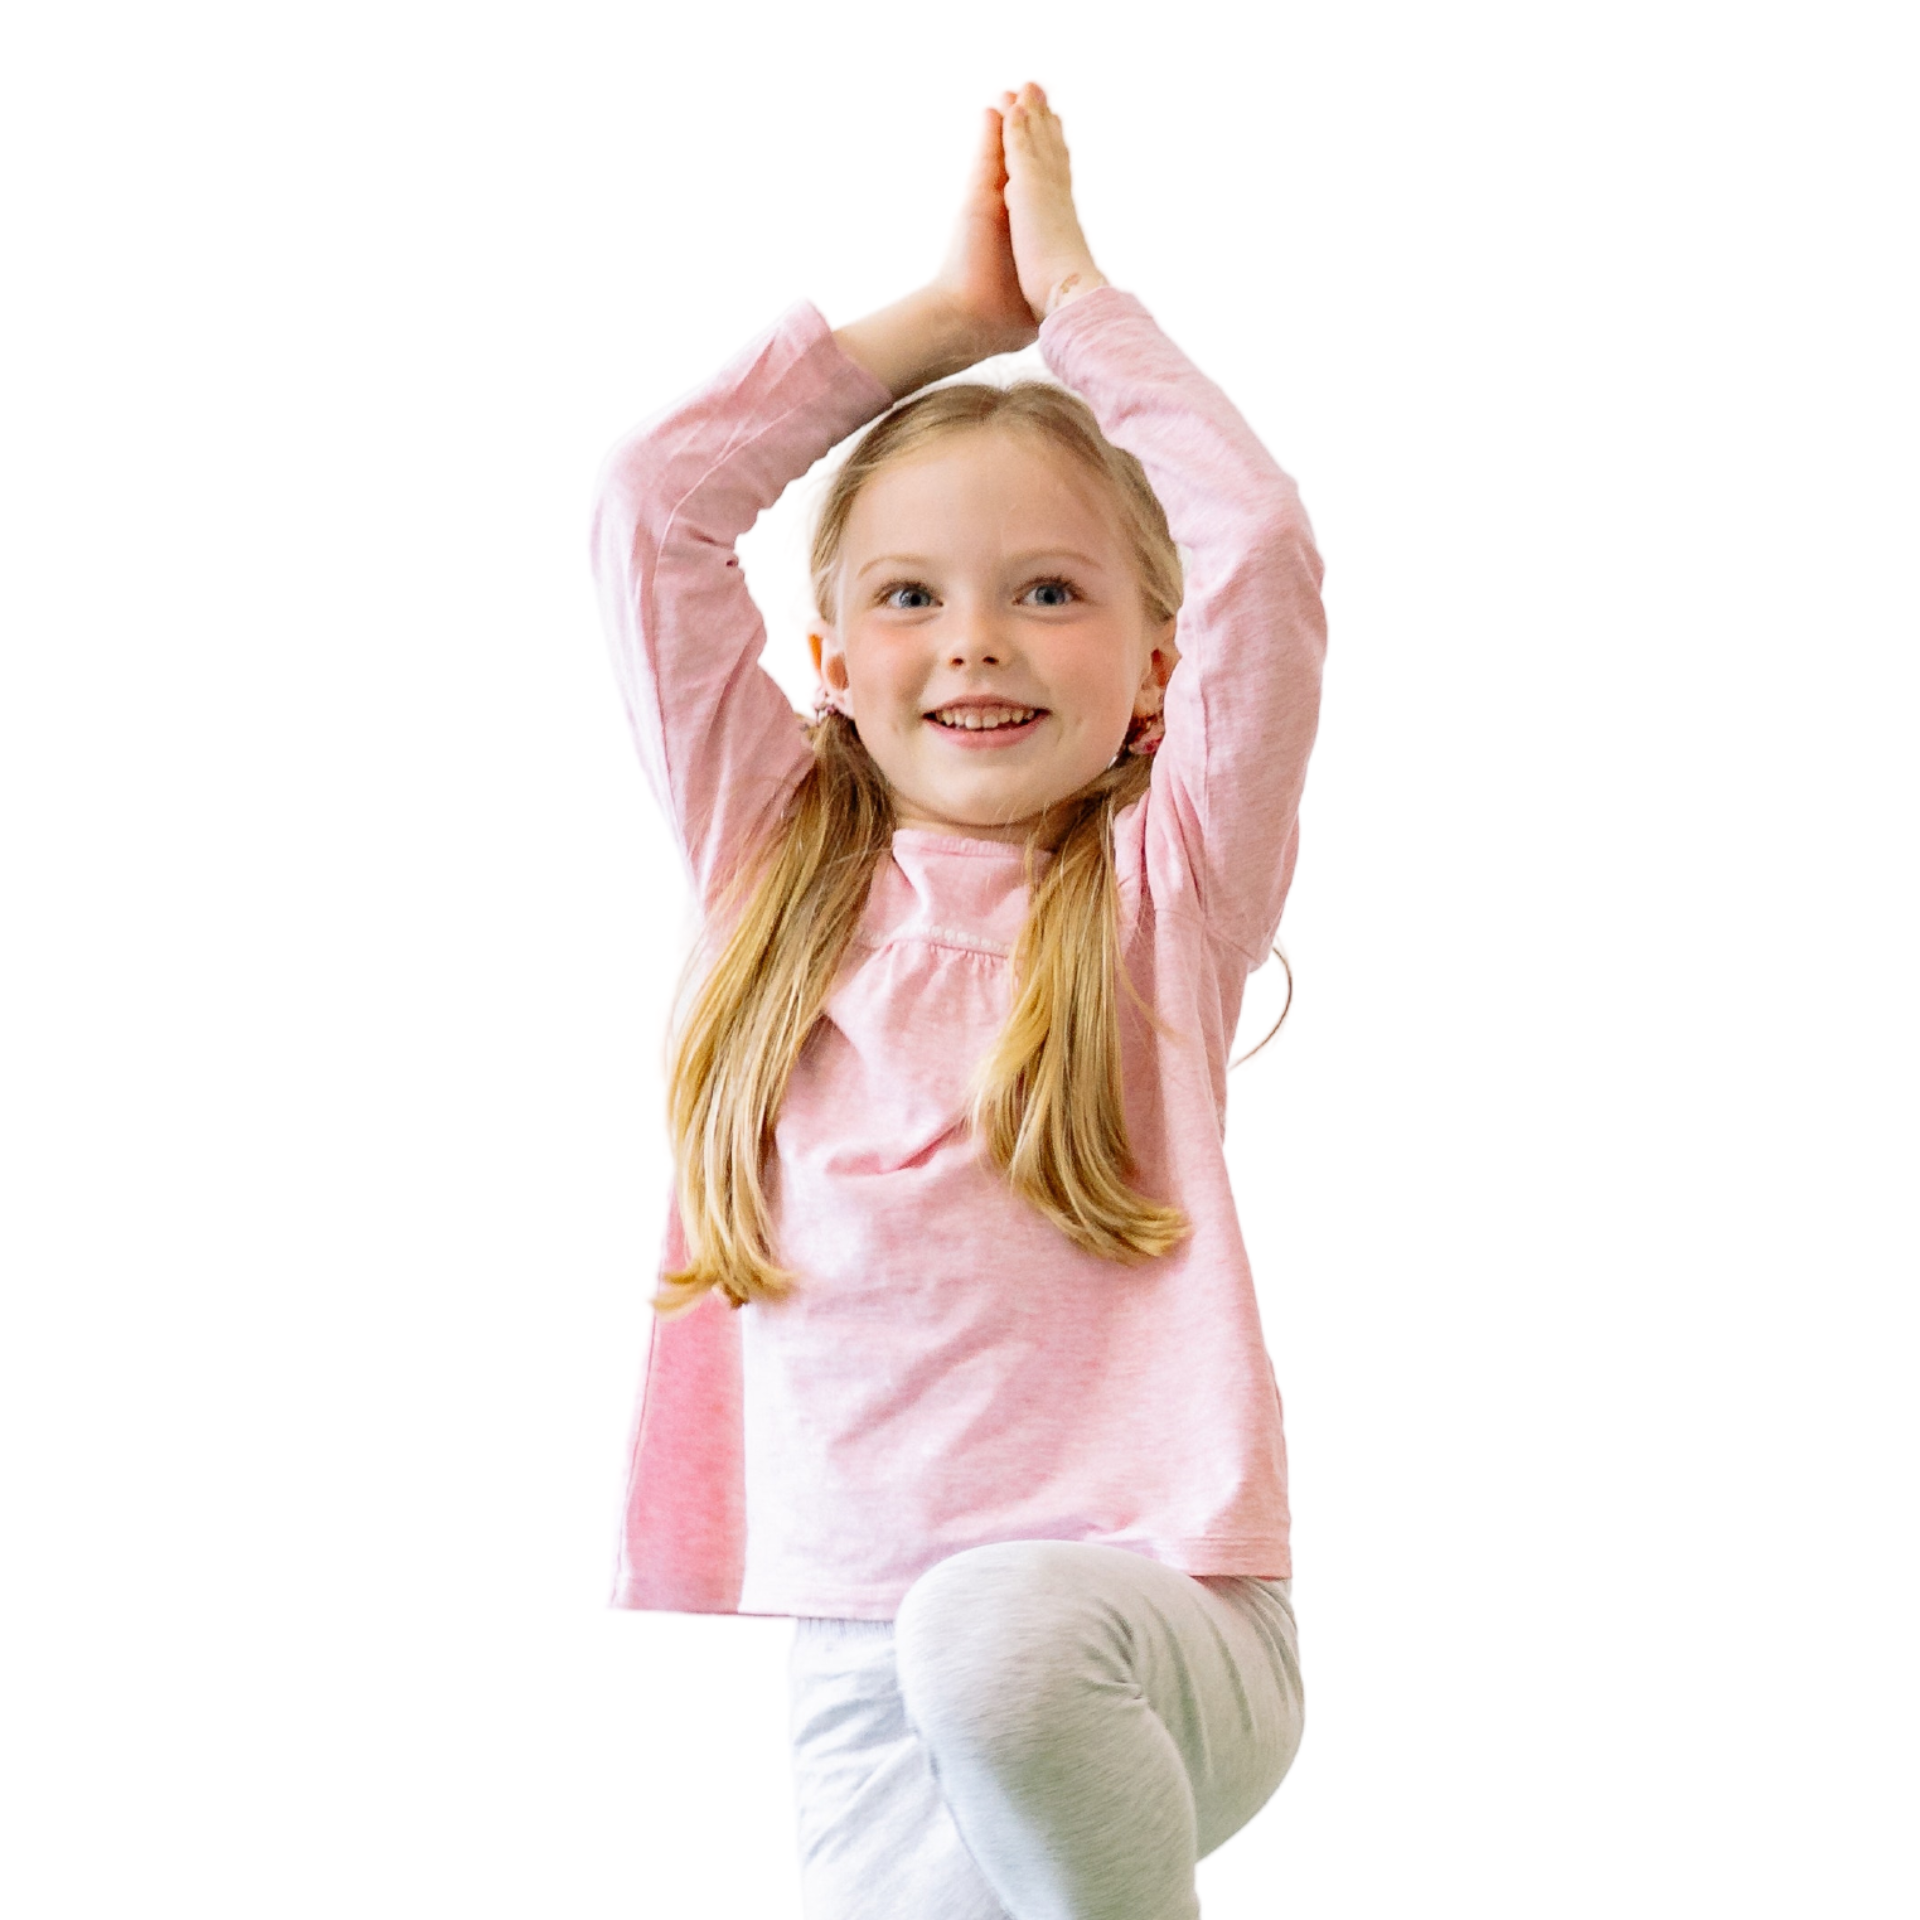 A young girl with long blond hair is doing the yoga tree pose.